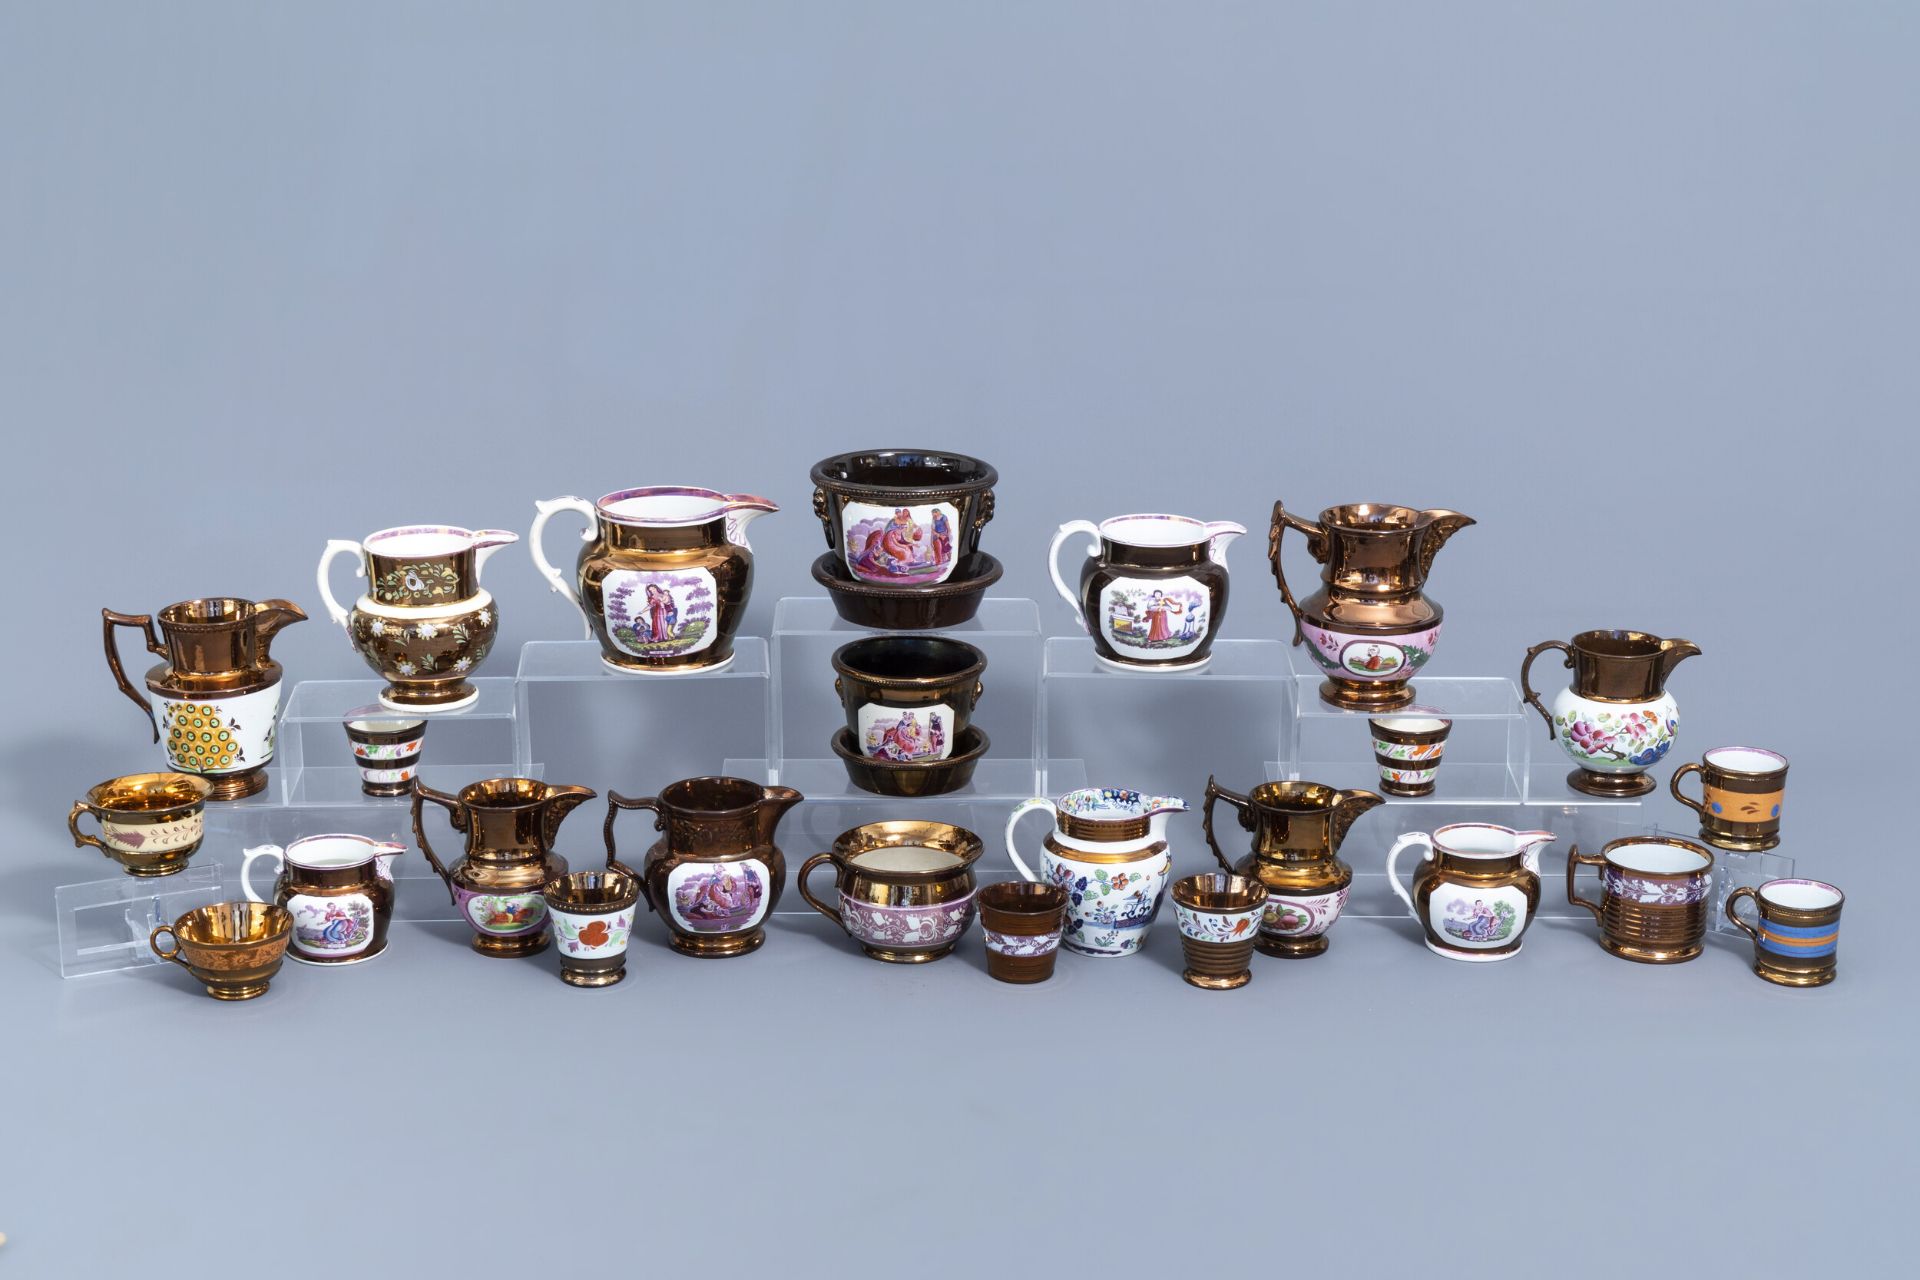 A varied collection of English lustreware items, 19th C. - Image 2 of 44